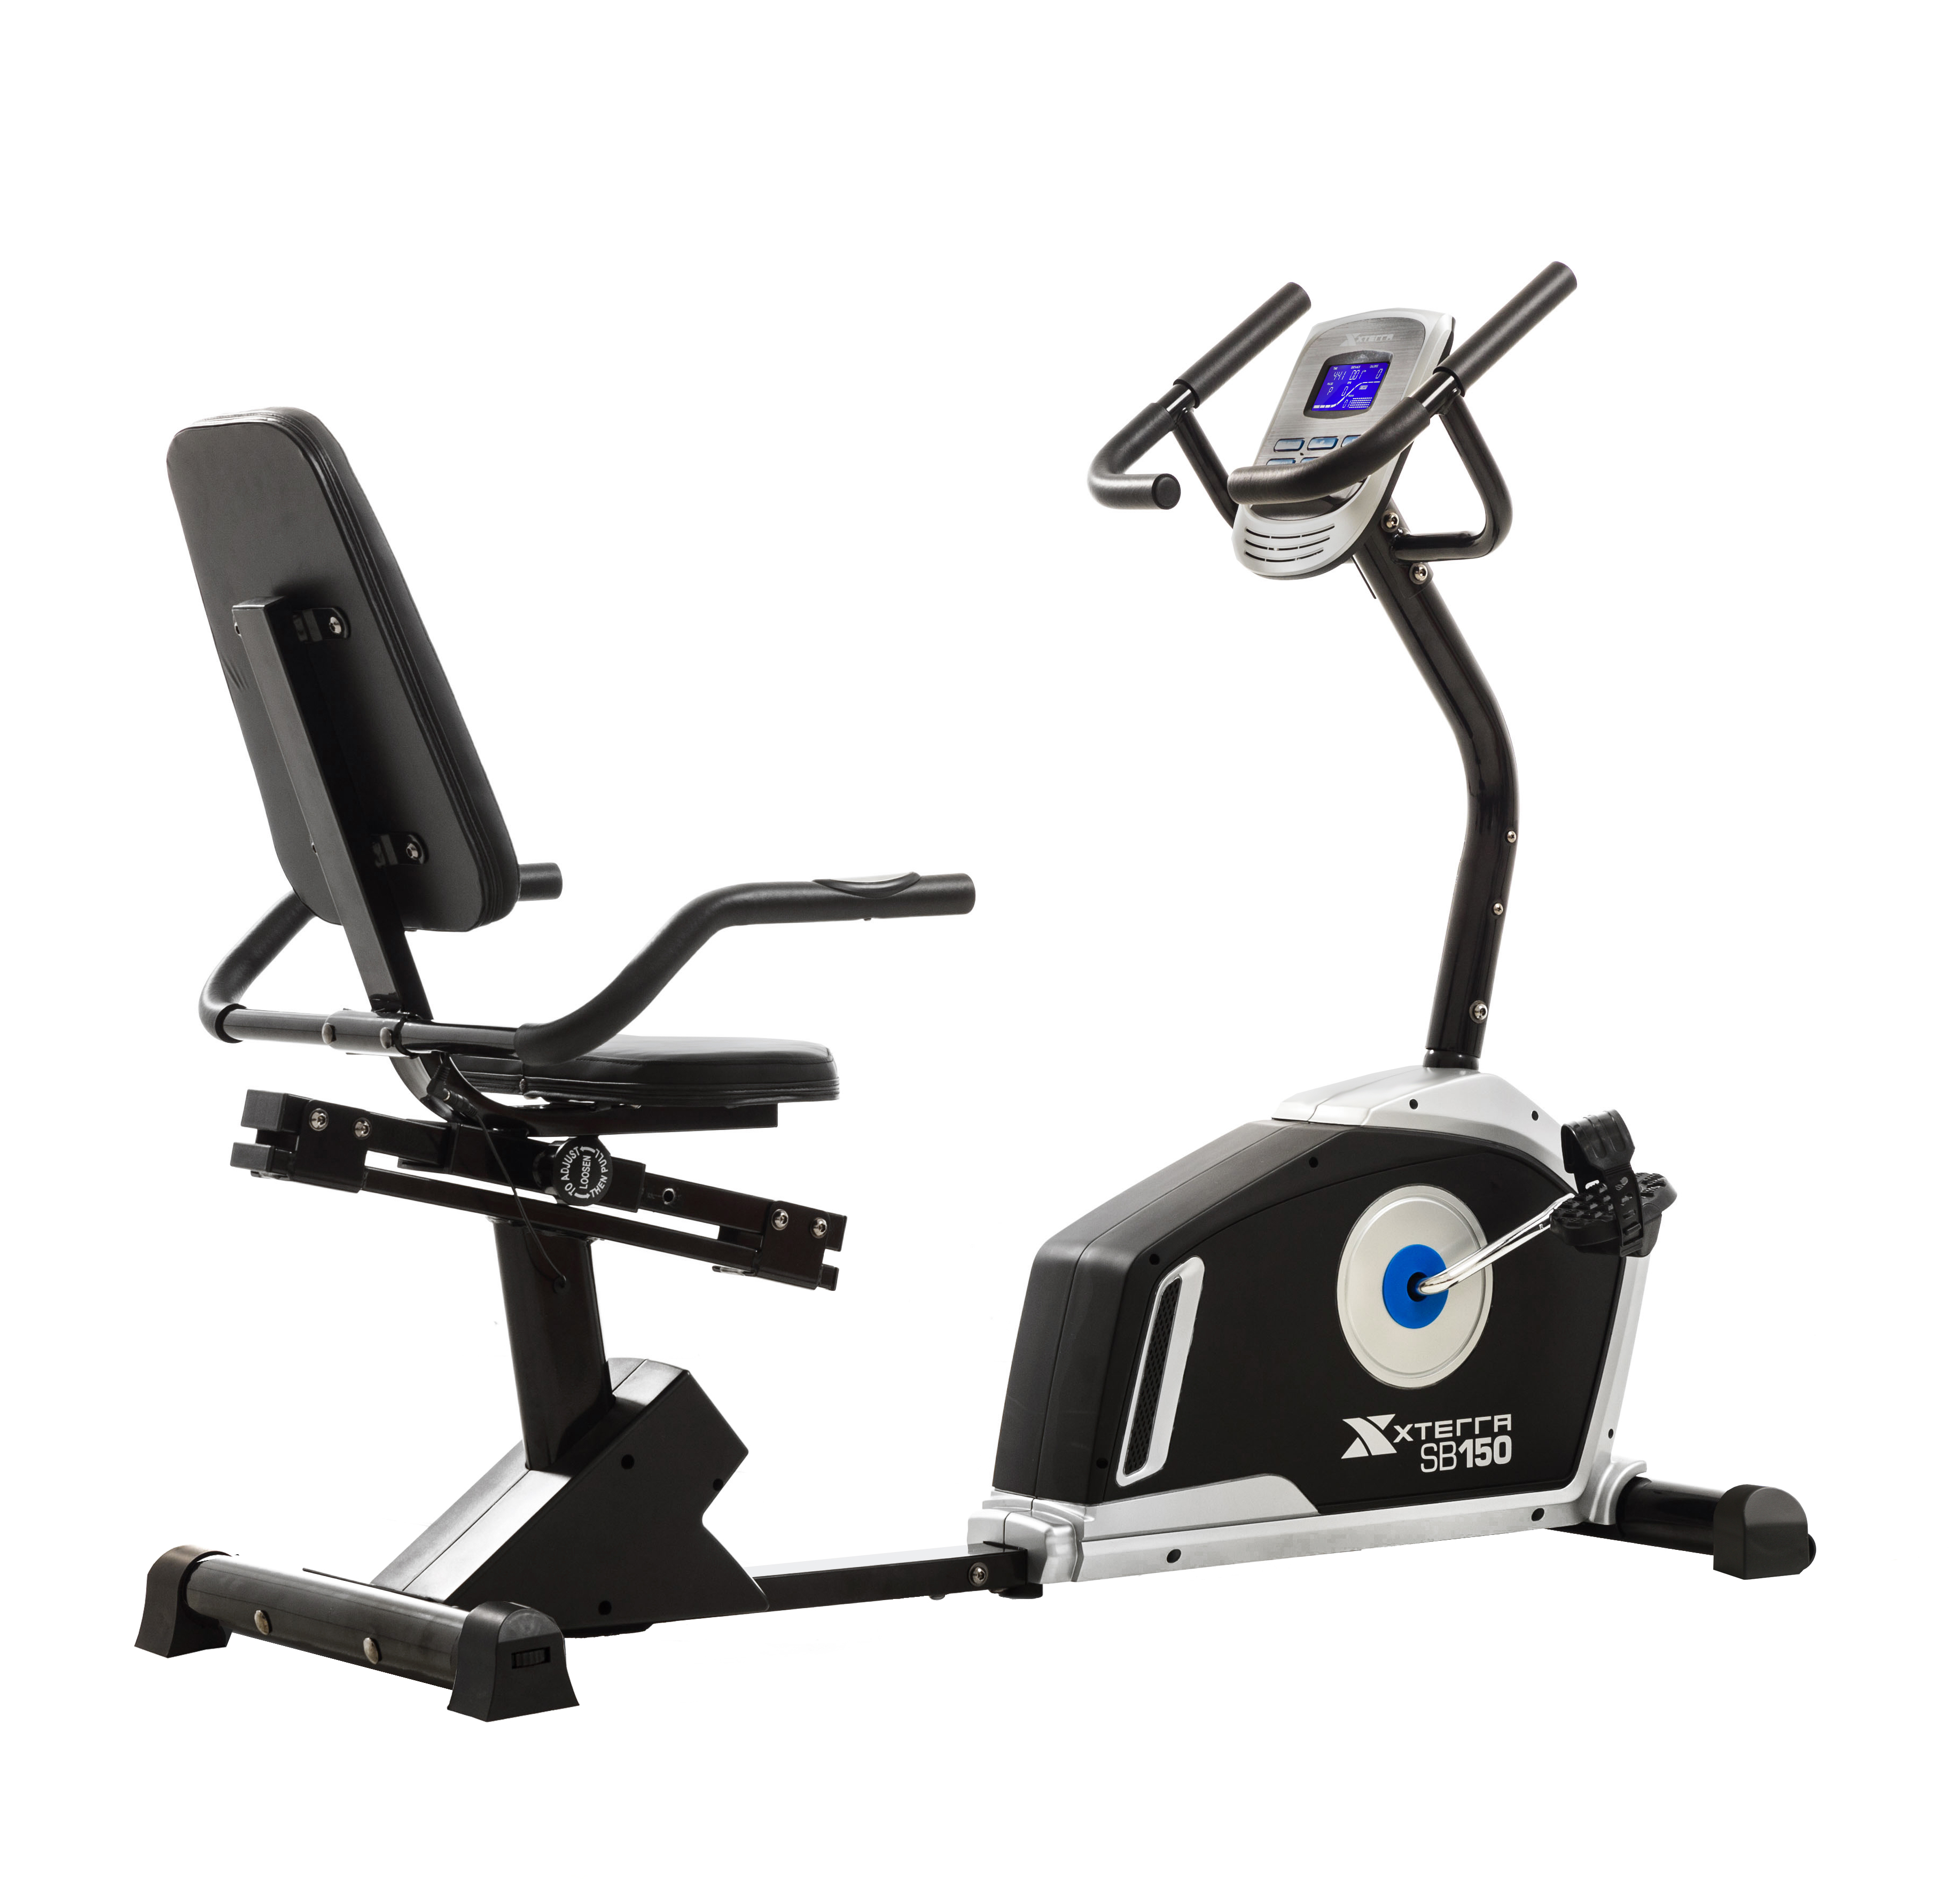 XTERRA Fitness SB150 Recumbent Bike with 24 Magnetic Resistance Levels - image 1 of 10